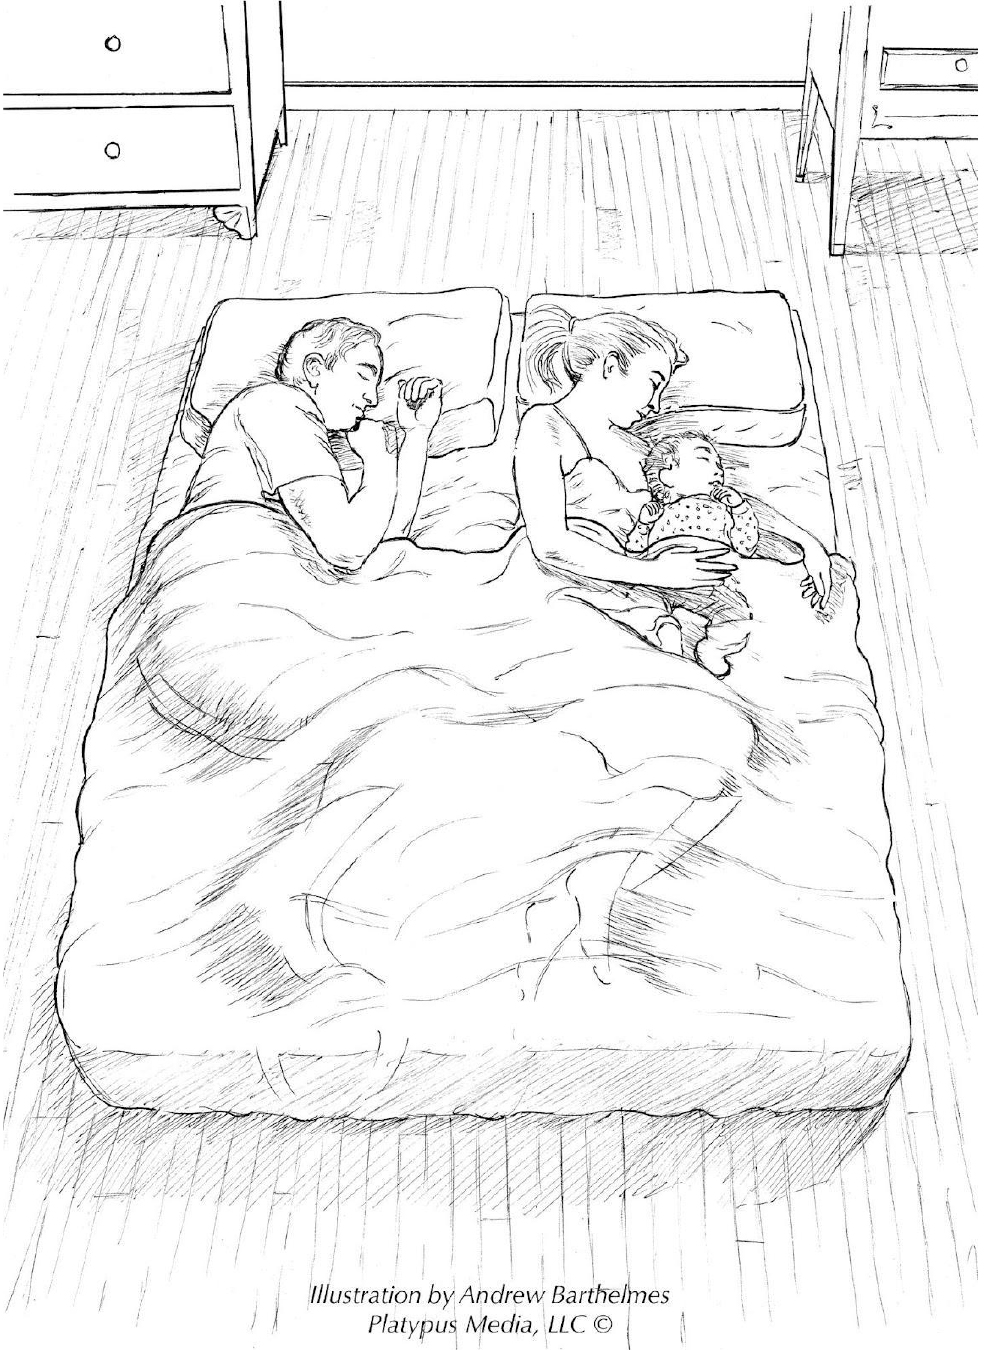 co-sleeping with your newborn